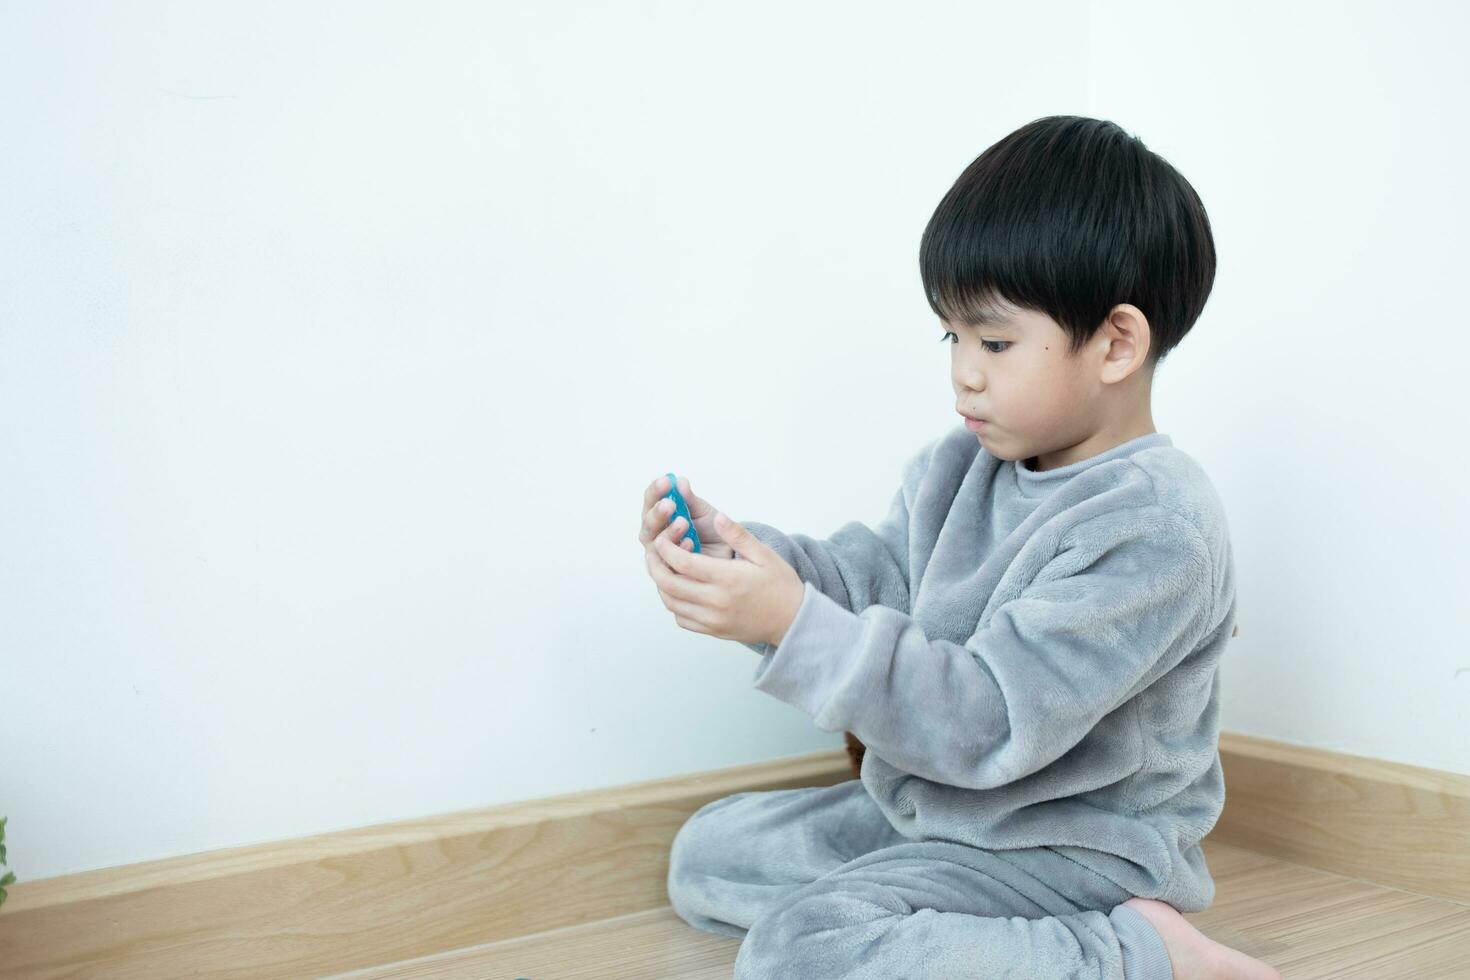 Asian boy having fun playing slam on the floor Learning outside the classroom photo